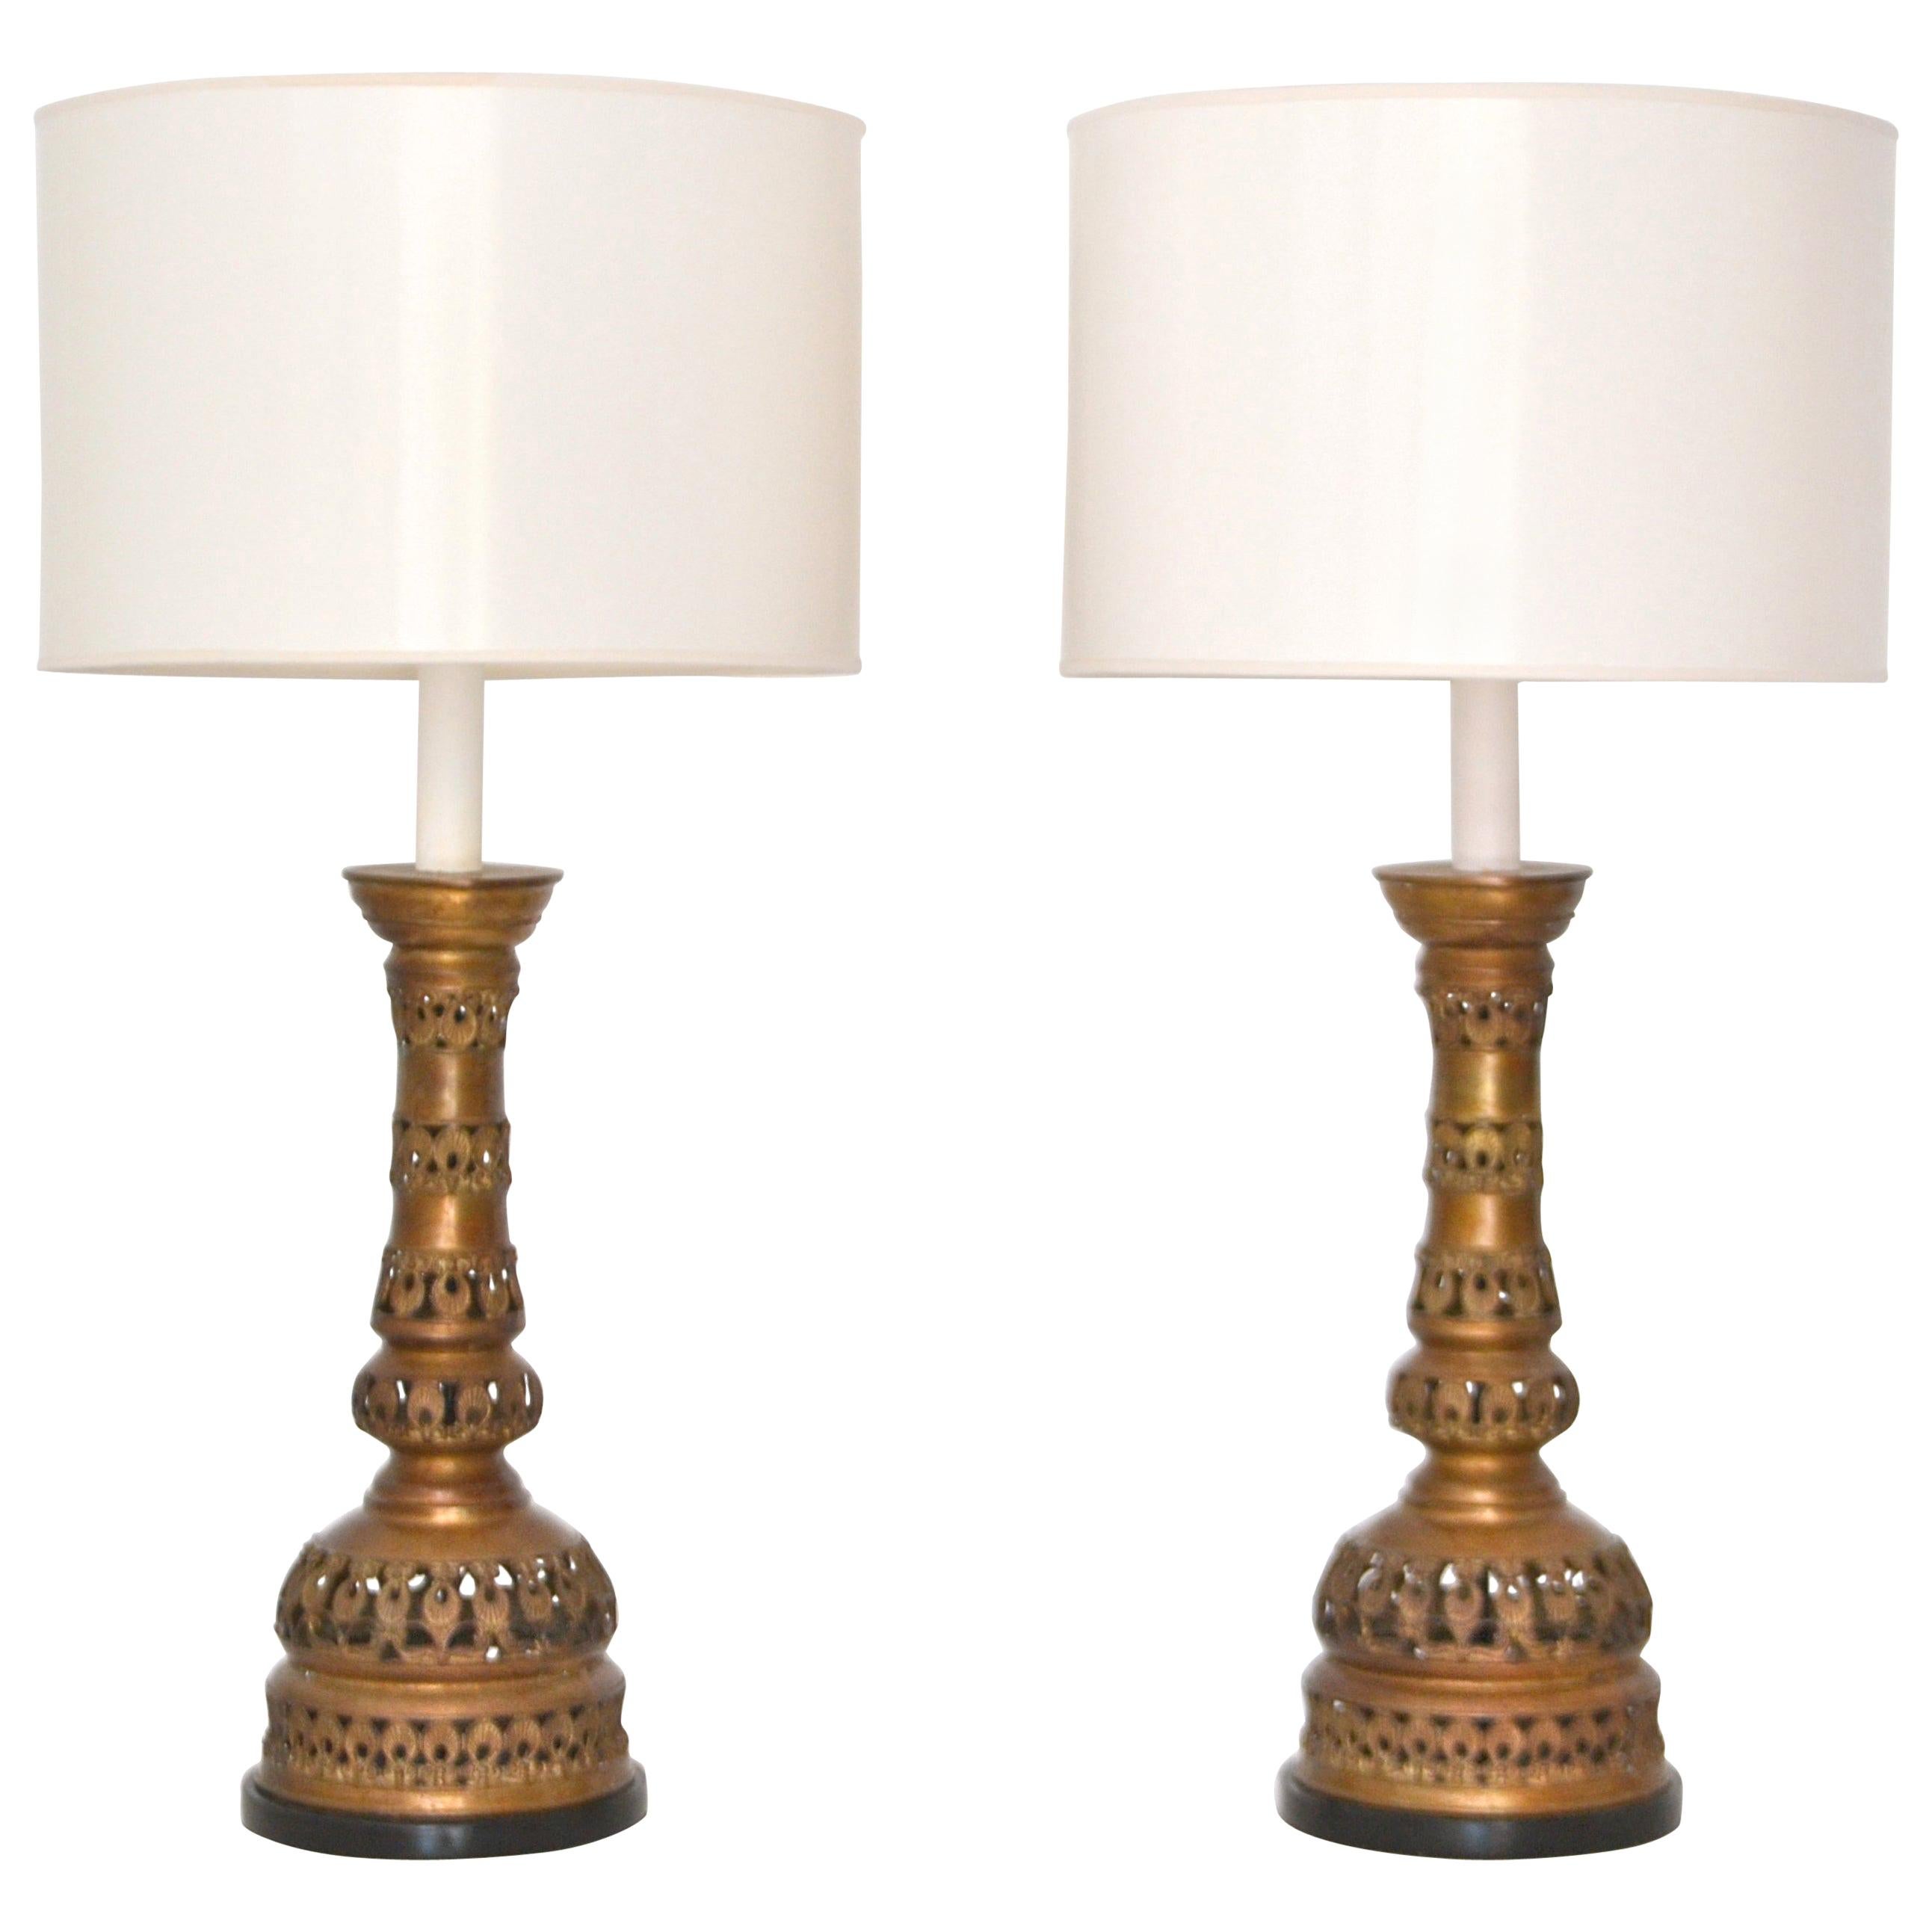 Pair of Midcentury Brass Candlestick Table Lamps For Sale